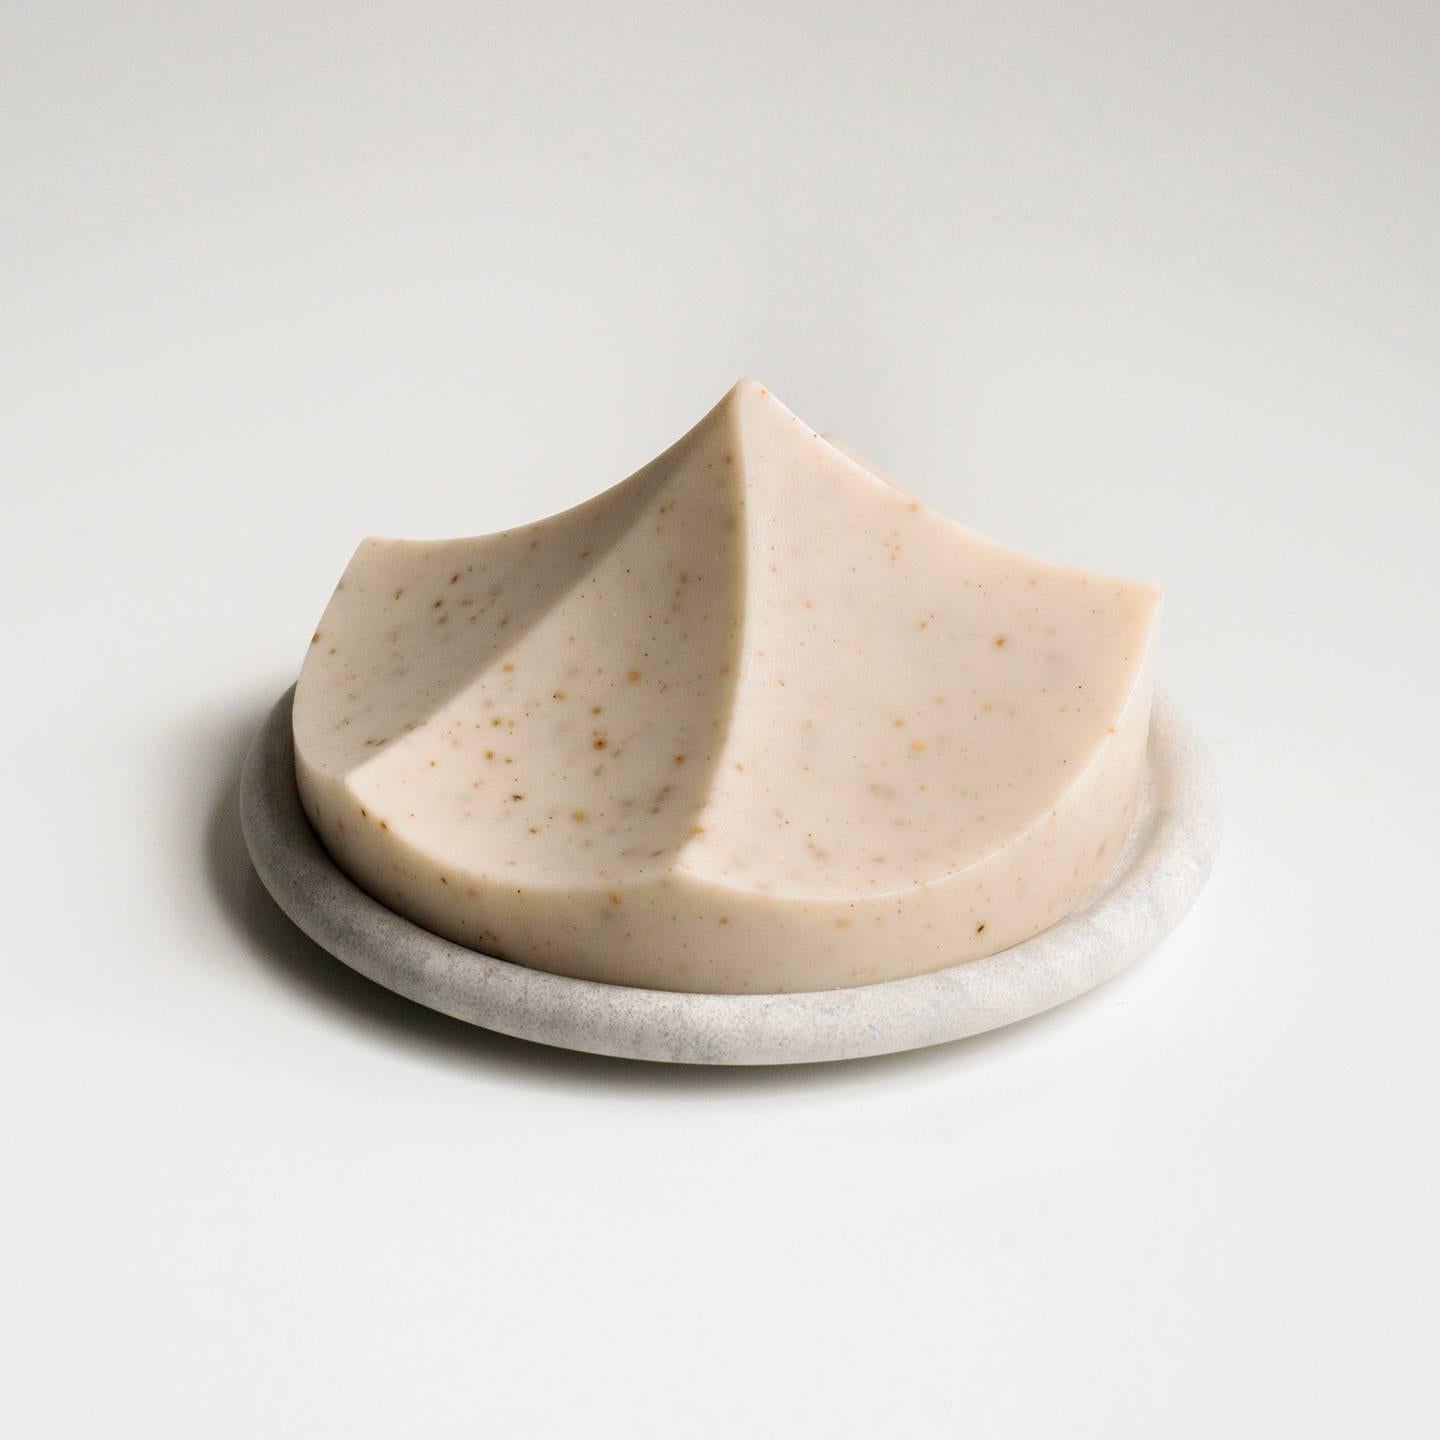 Linden
Linden / chamomile / lemon / macadamia / cucumber seed oil

A tactile object by nature, the Erode Soap Summit Series becomes one of desire and play, adding a different kind of beauty to the daily ritual of bathing. Each organic soap is